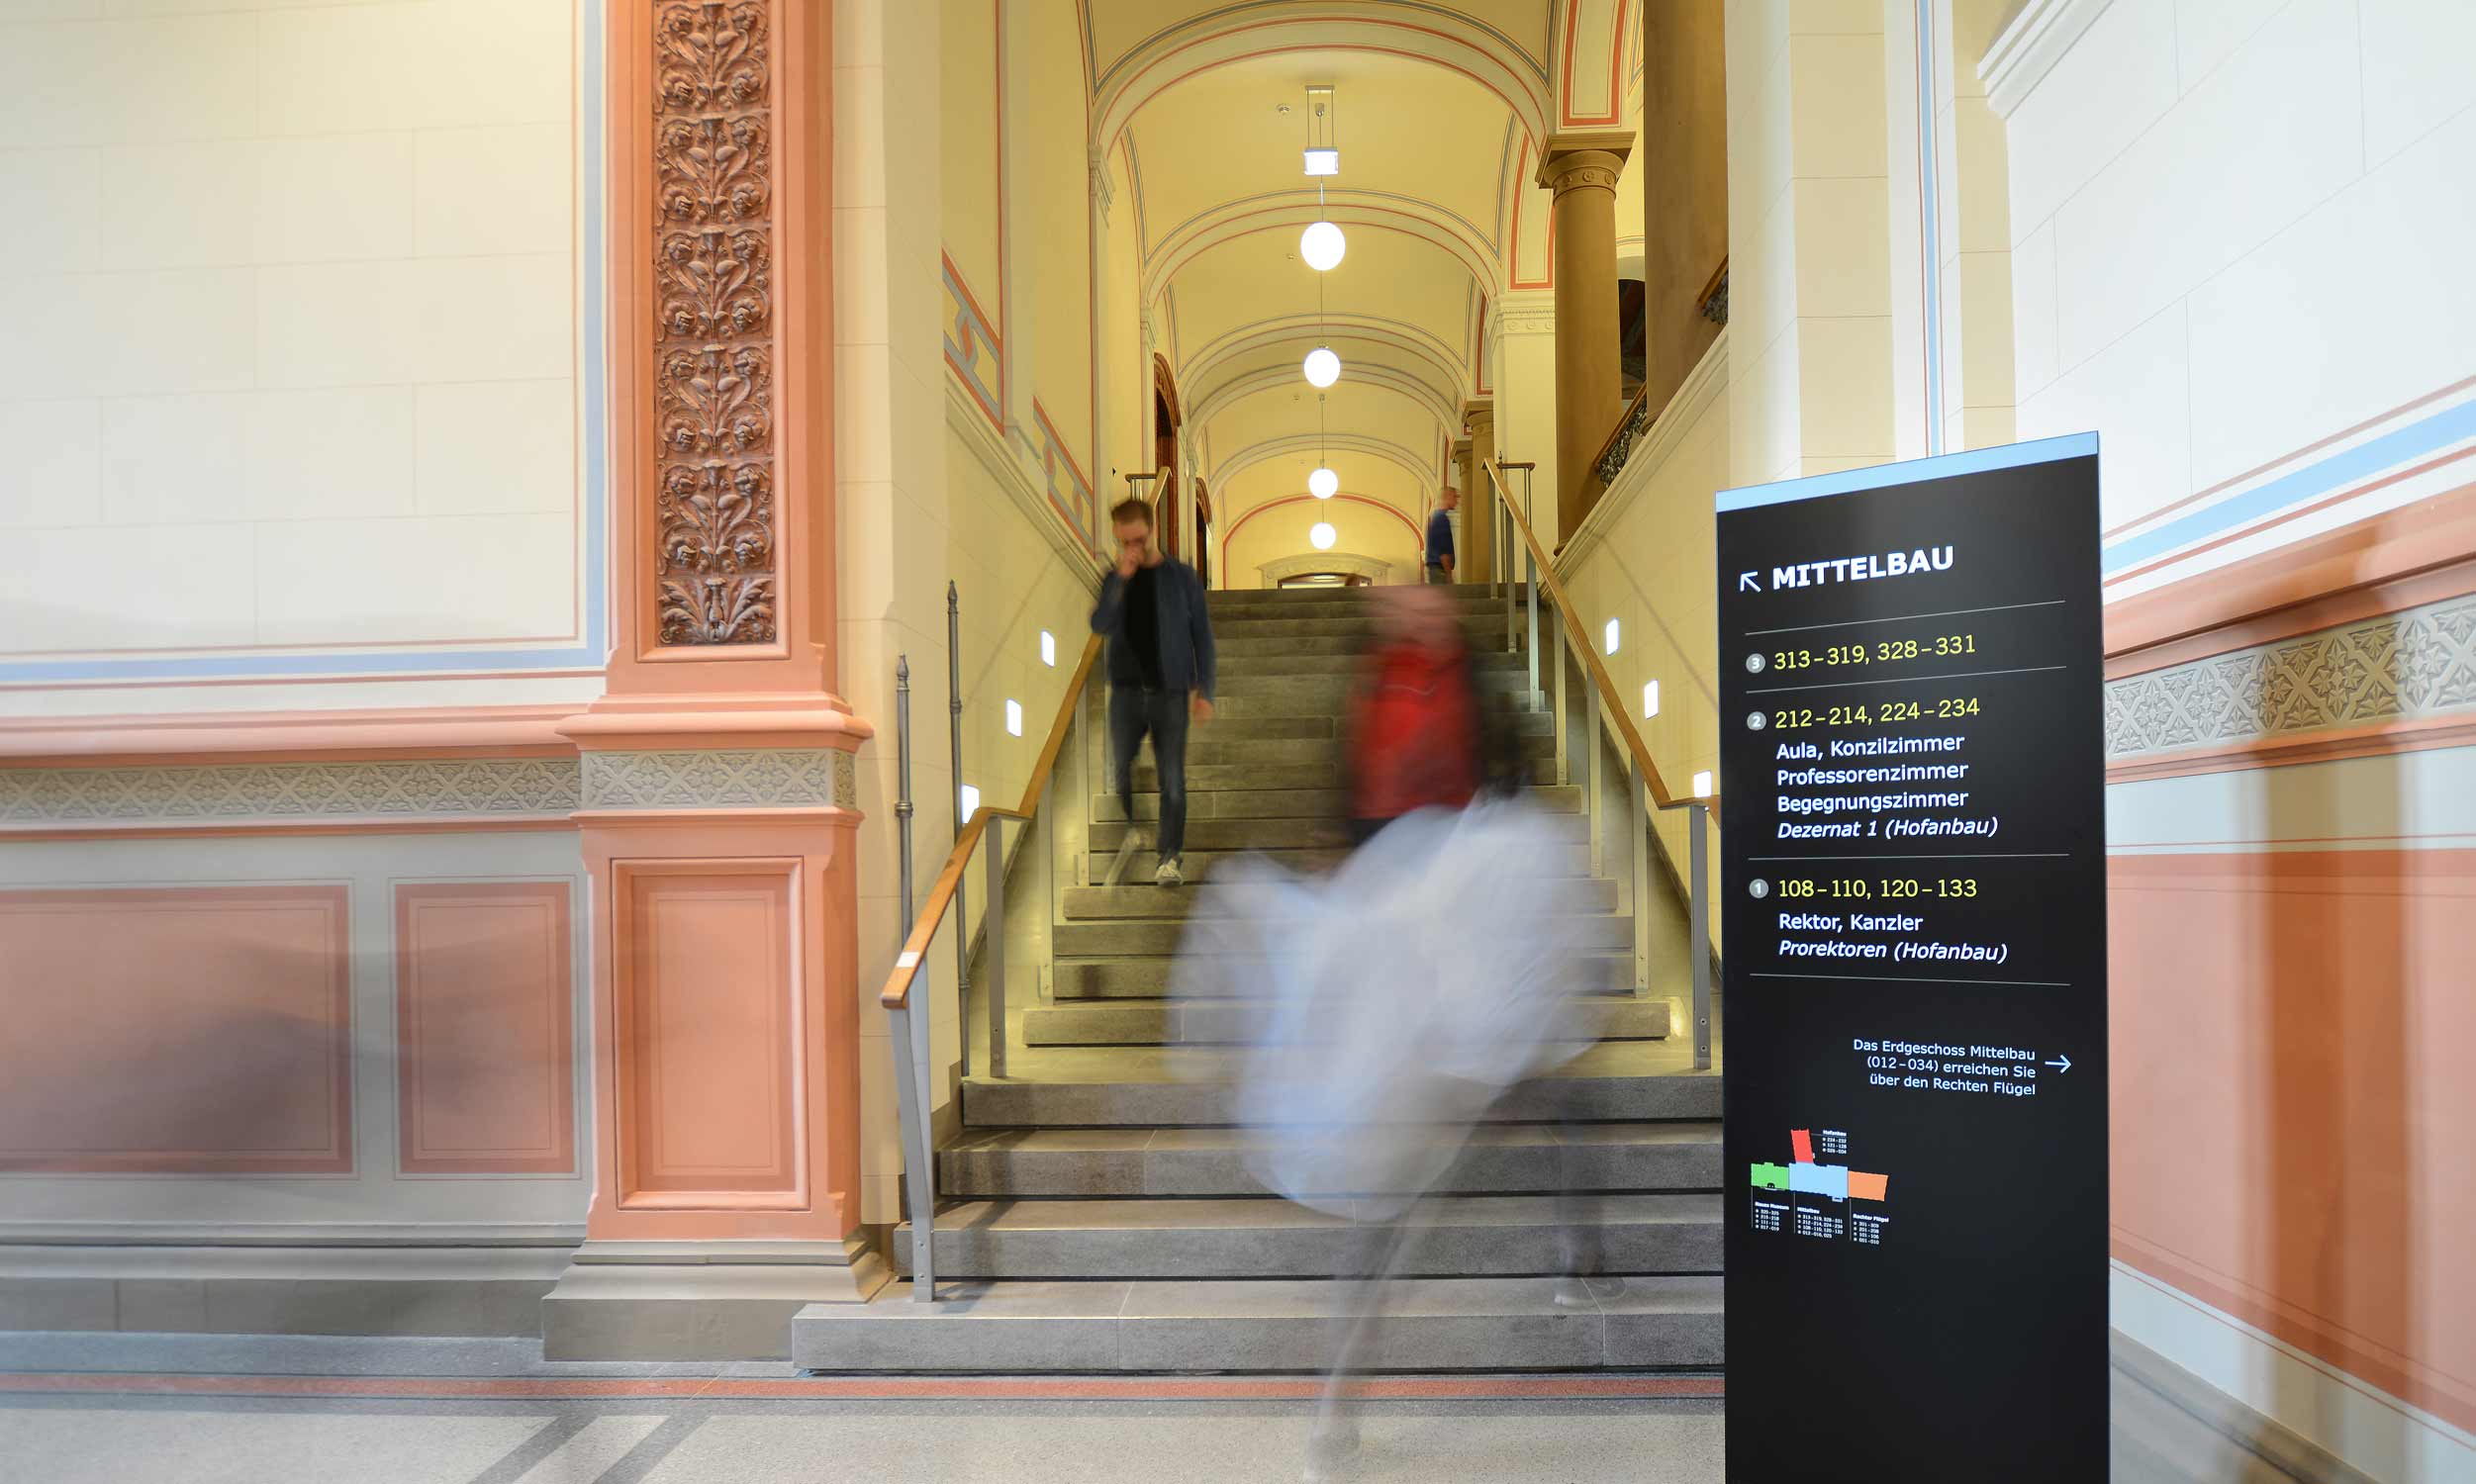 A view into the entrance area of the University of Rostock. In the background of the picture, the staircase leading to the first floor, with a few people in motion out of focus. On the right you can see a black stand with light-coloured lettering, an element of the signposting system for the University of Rostock.